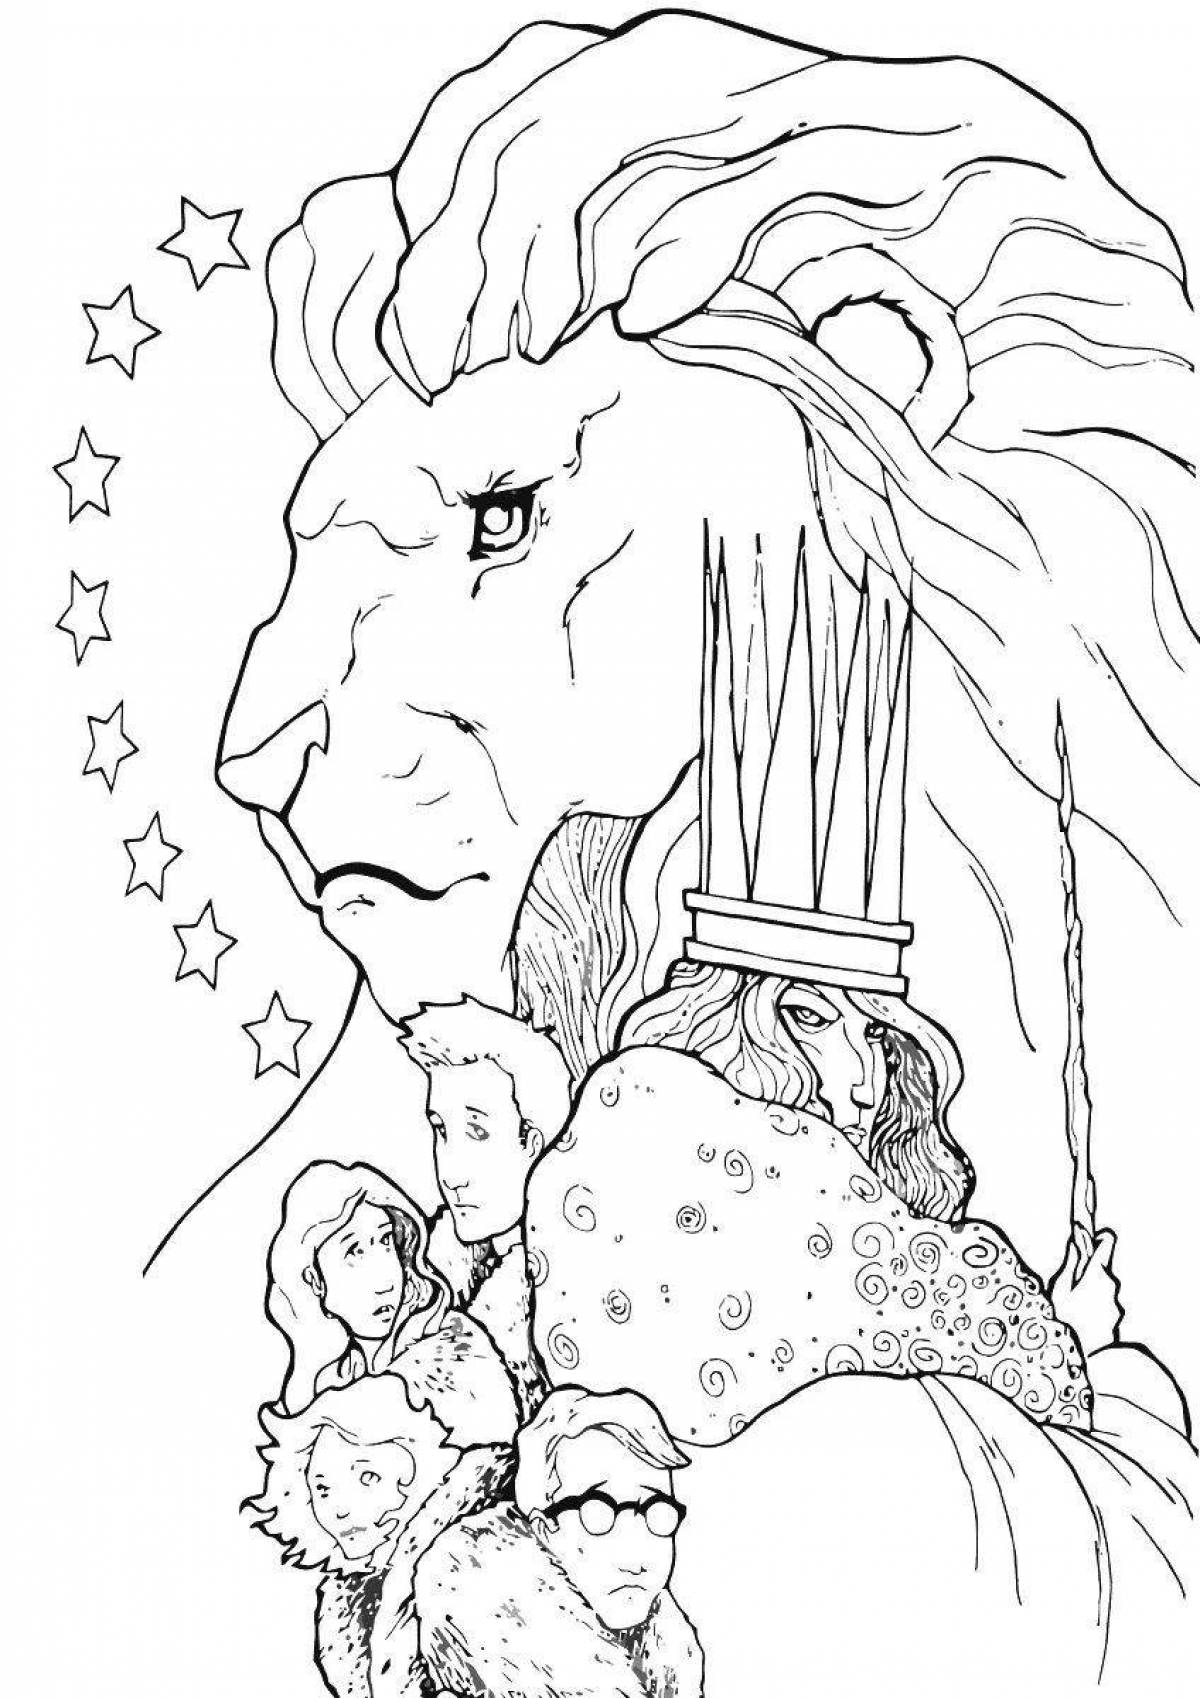 Awesome narnia coloring page